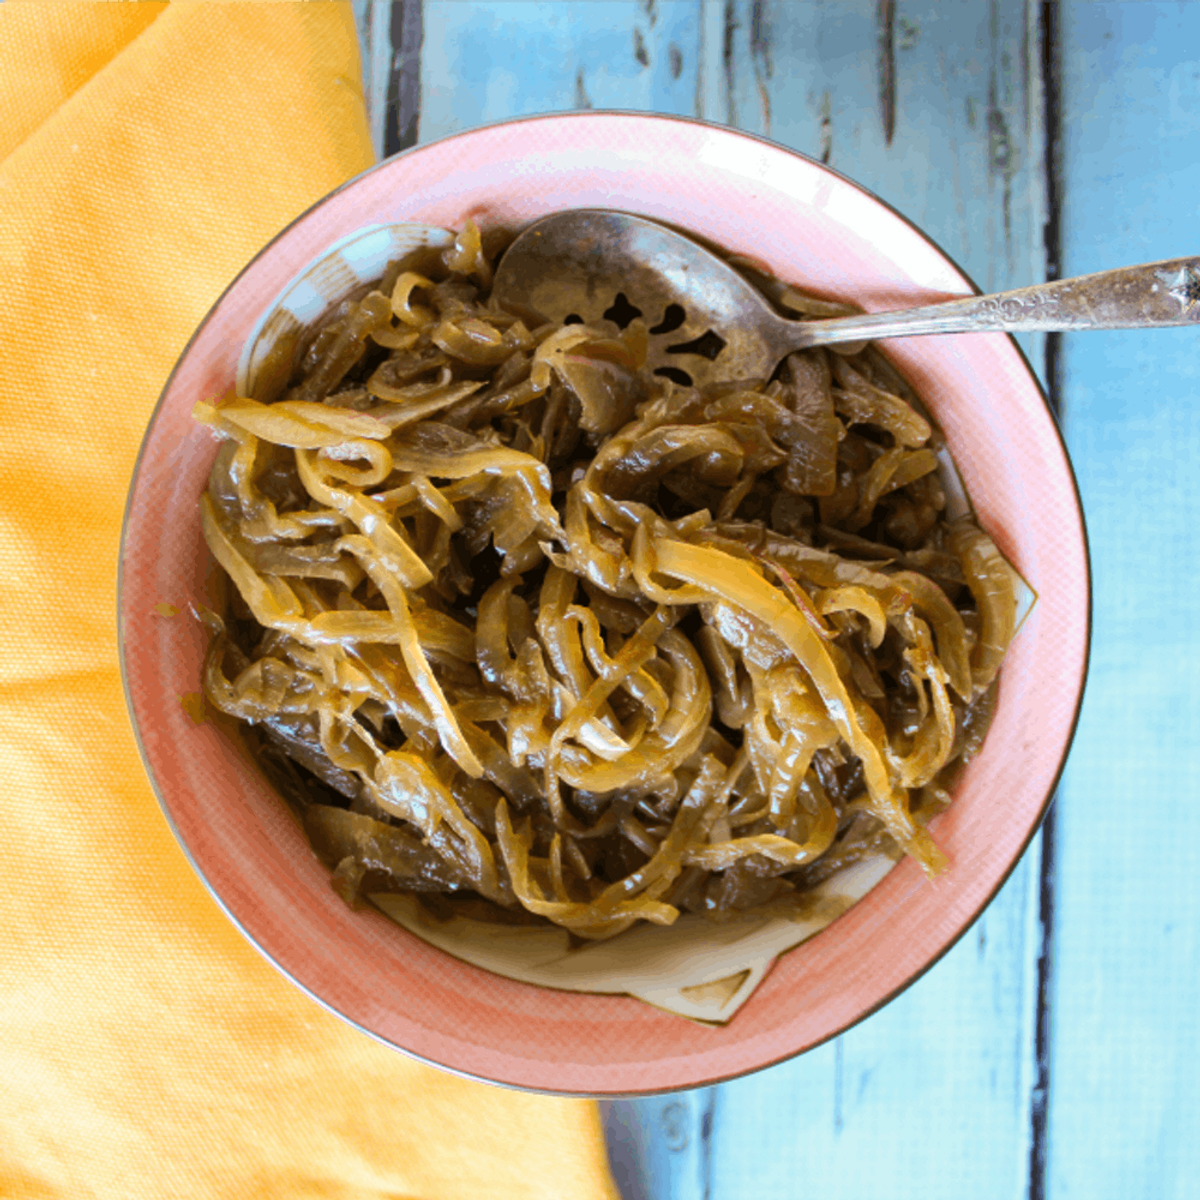 Food Hack: Slow Cooker Caramelized Onions Add Big Flavor to Any Meal